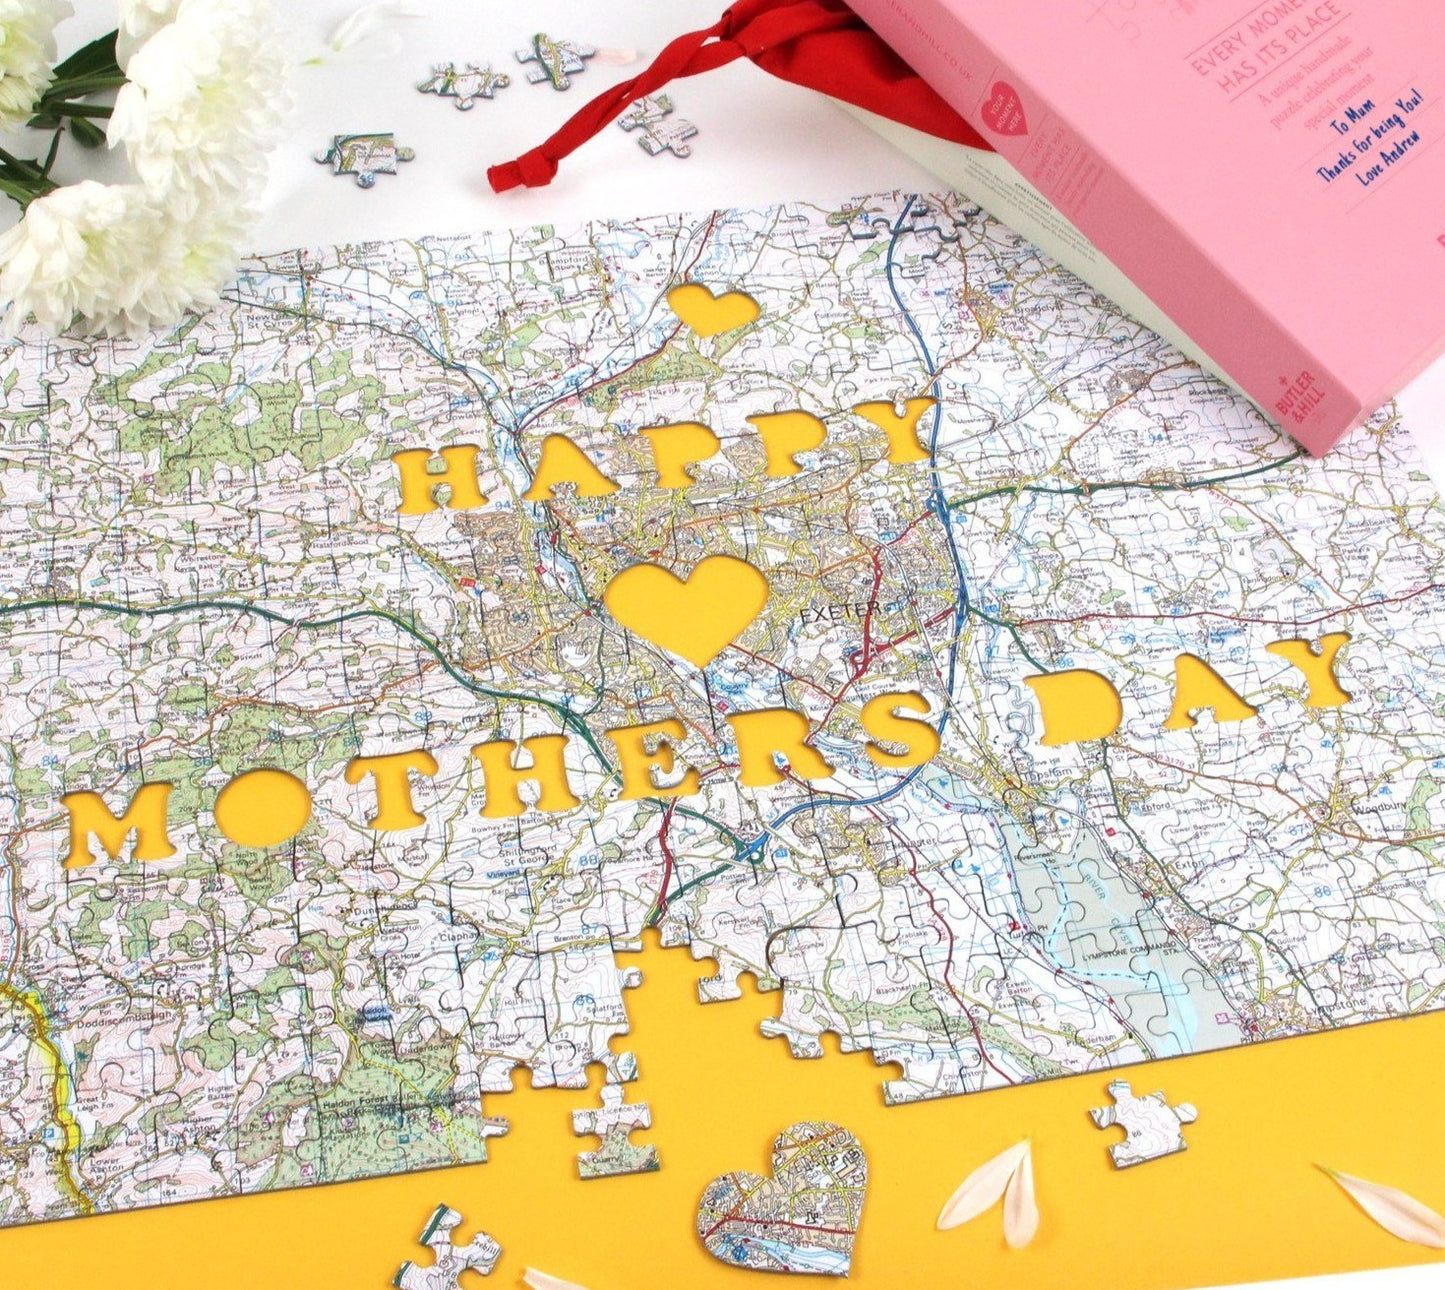 Personalised Mother's Day Jigsaw Puzzle - All Jigsaw Puzzles UK
 - 2